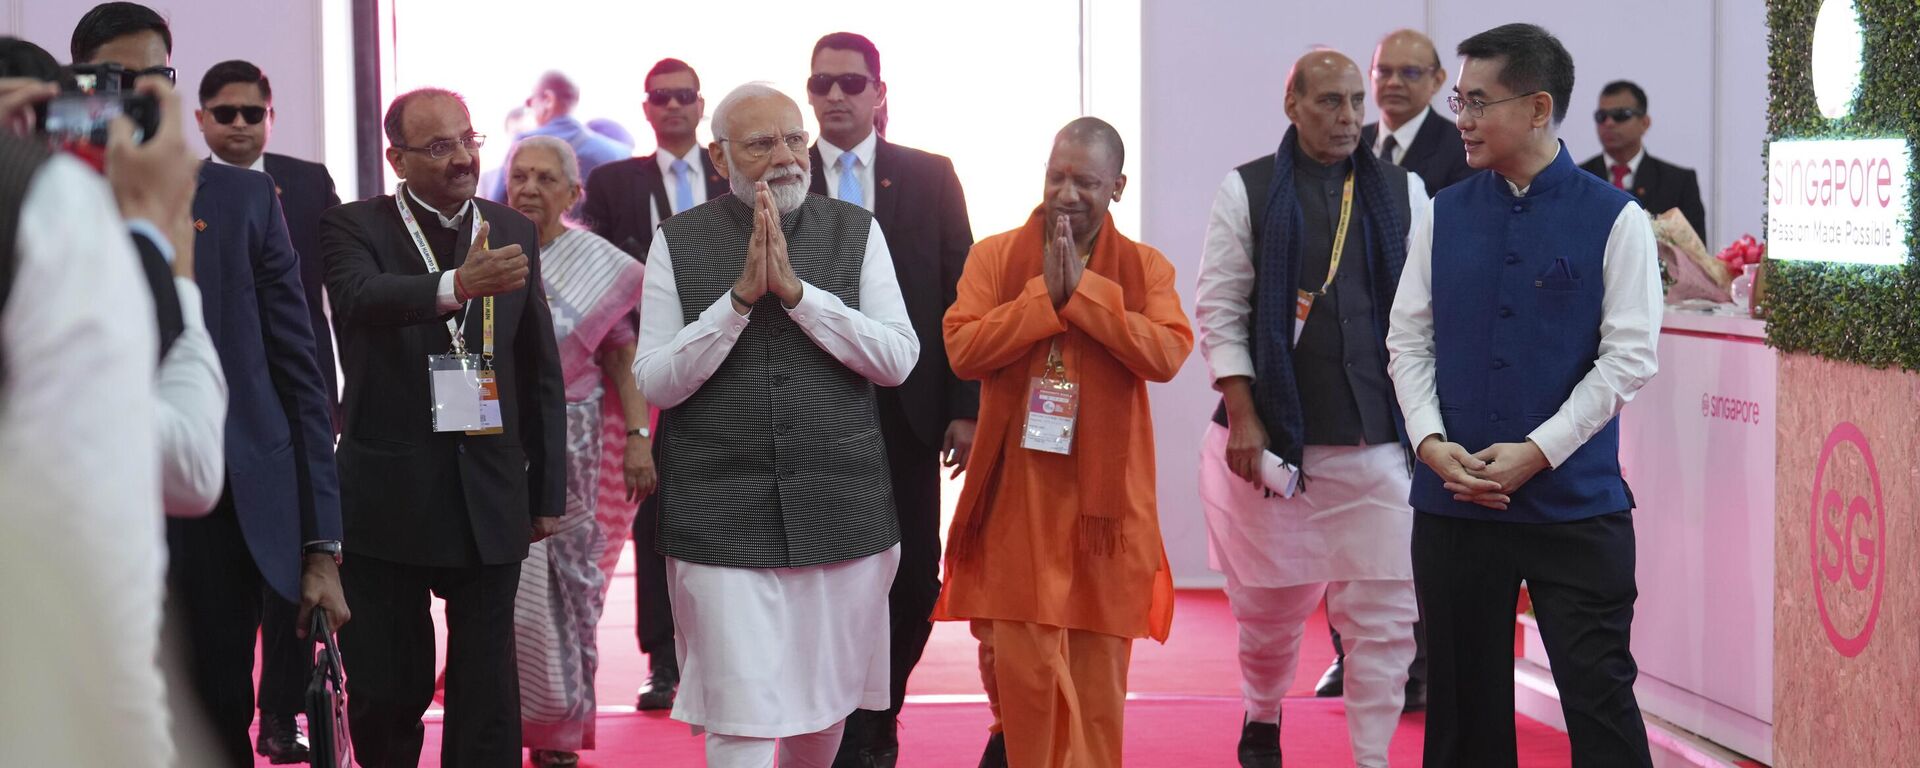 Indian Prime Minister Narendra Modi, centre, is flanked by Uttar Pradesh state Chief Minister Yogi Adityanath, in saffron dress, as they visit stalls during global investors summit in Lucknow, India. Friday, Feb. 10, 2023.  - Sputnik India, 1920, 10.02.2023